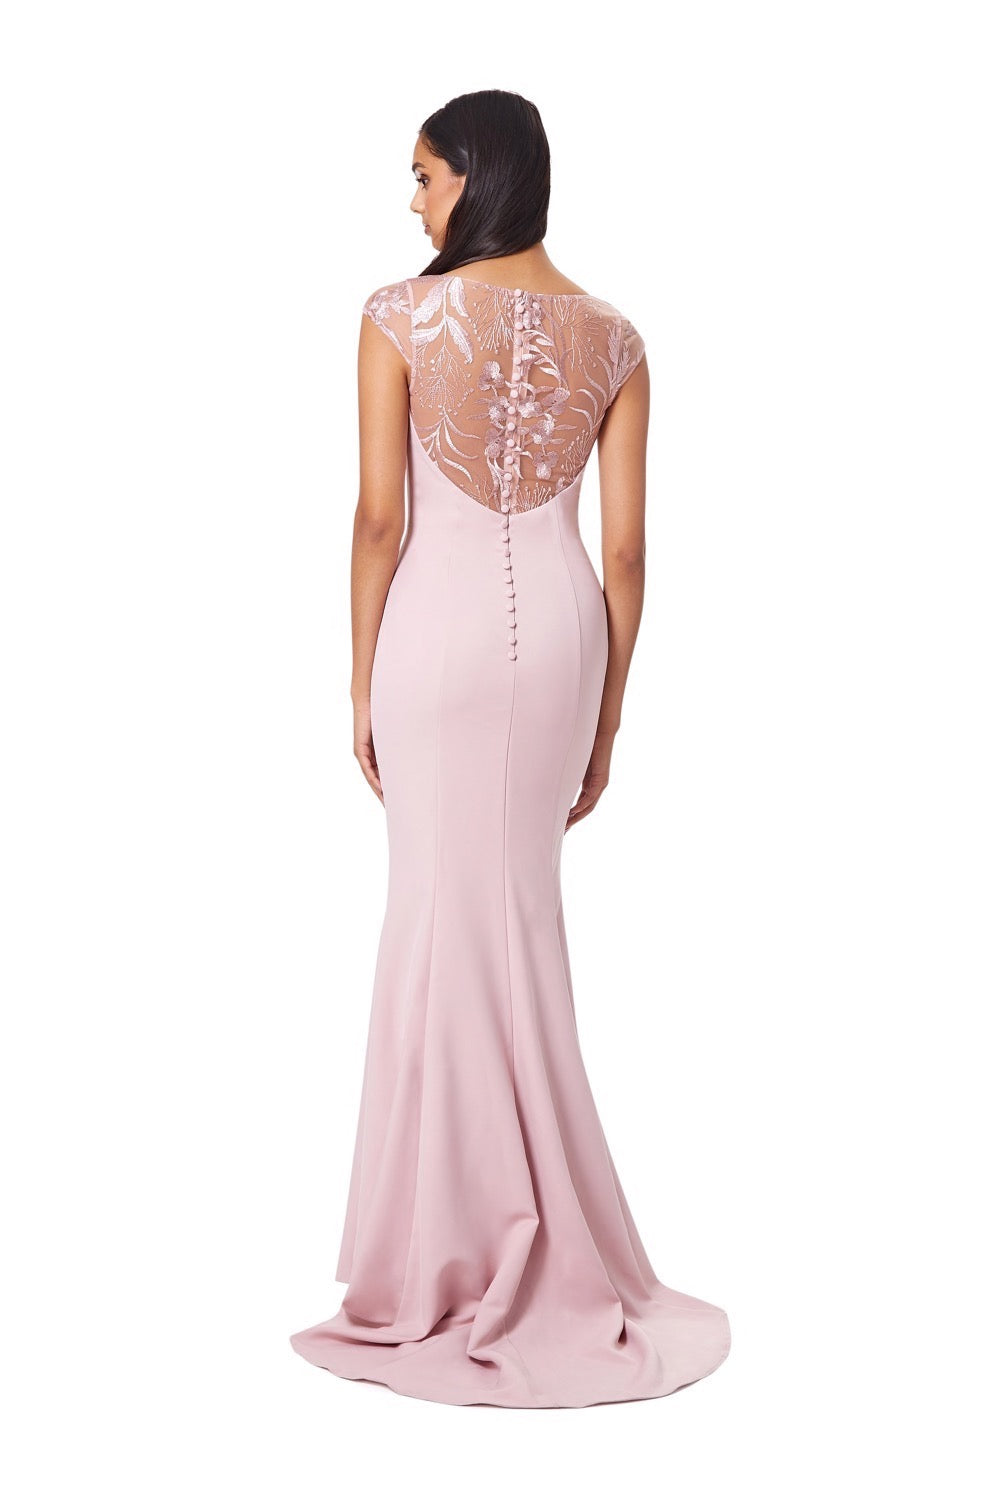 Masa Fishtail Maxi Dress with Lace Cap Sleeves and Embroidered Button Back, UK 18 / US 14 / EU 46 / Original Pink